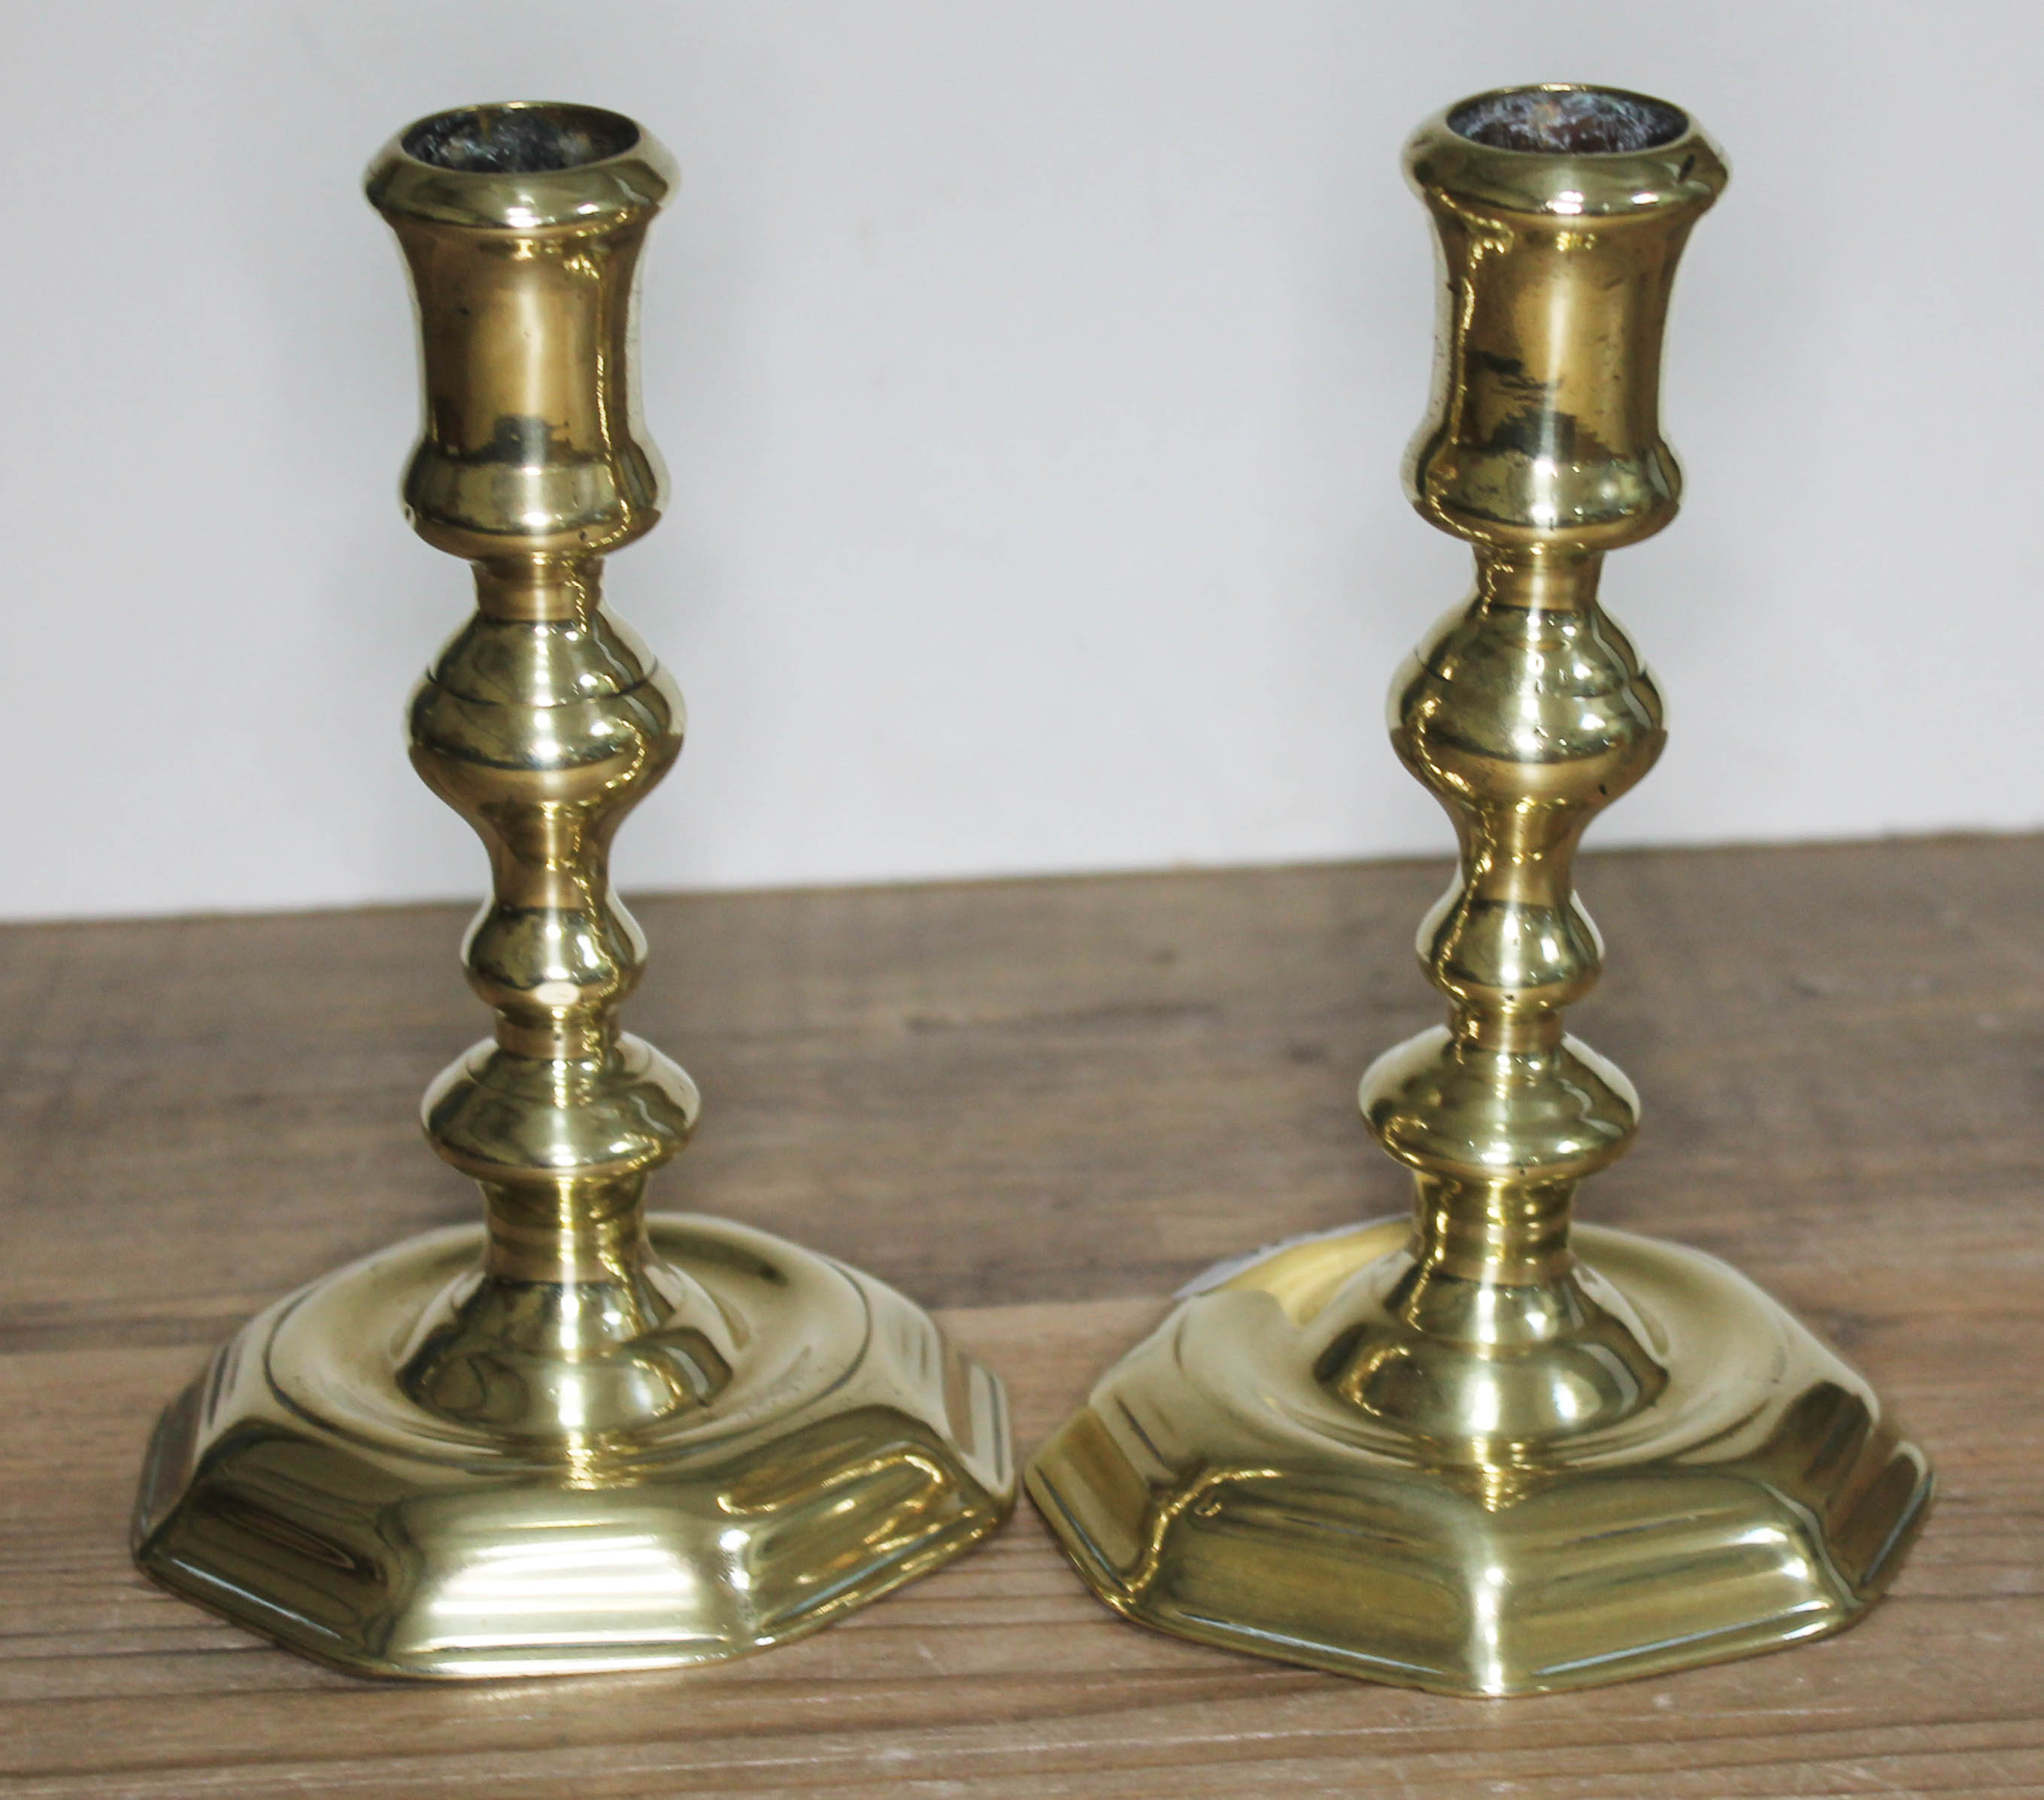 A pair brass candlesticks, heights 17cm. Condition: dents to both sticks.